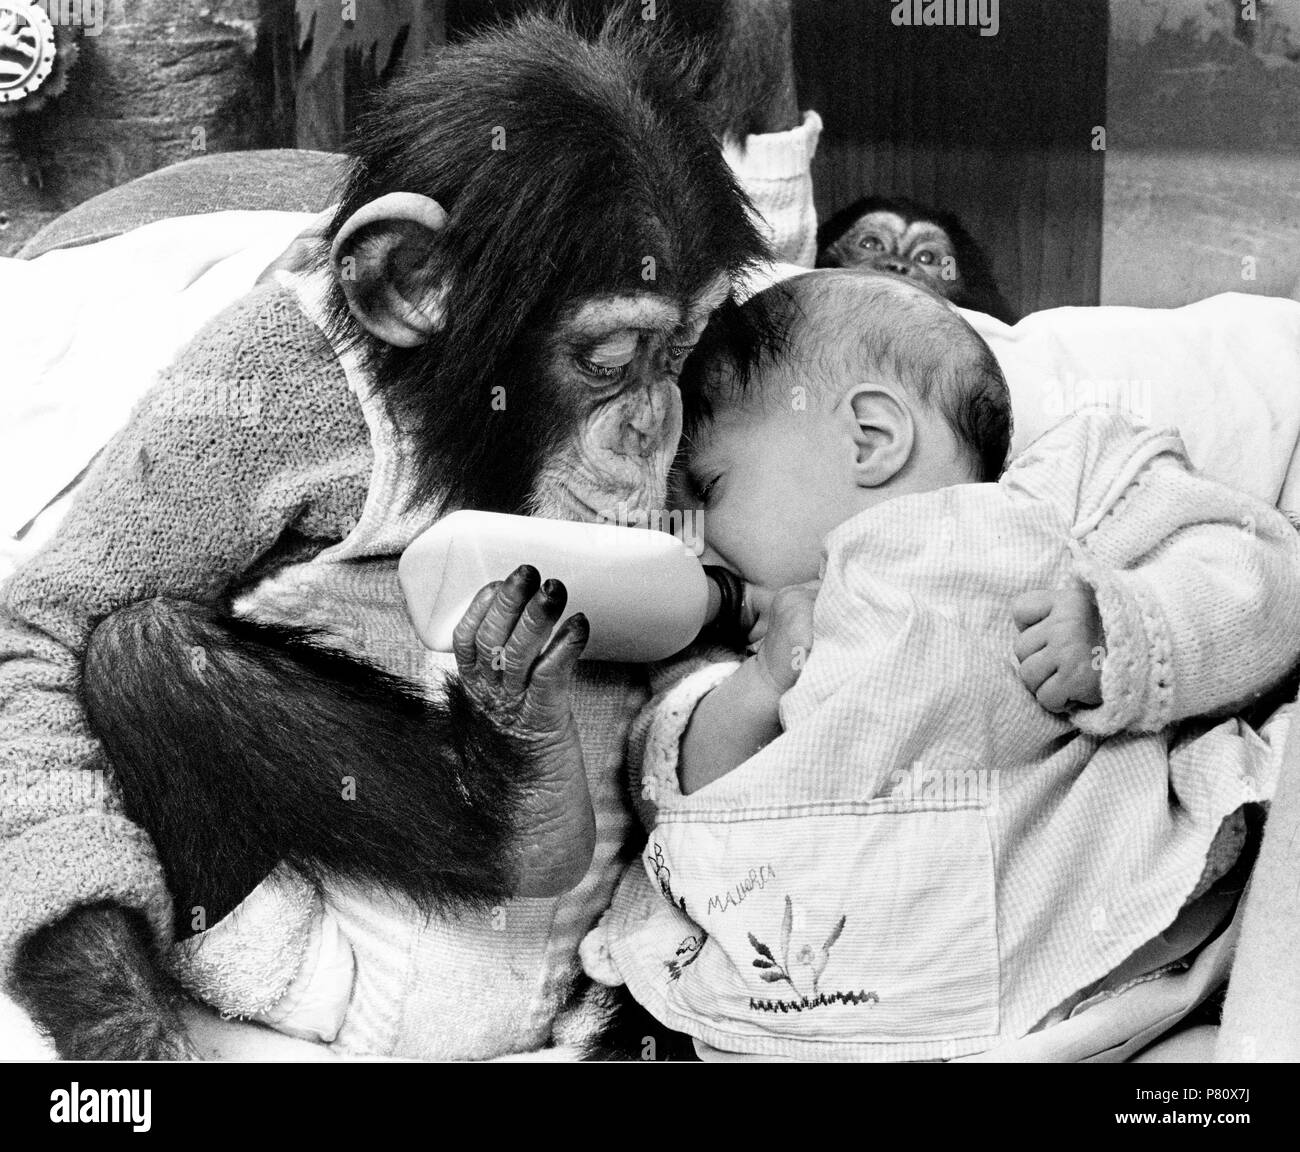 Chimpanzee trying to feed baby, England, Great Britain Stock Photo